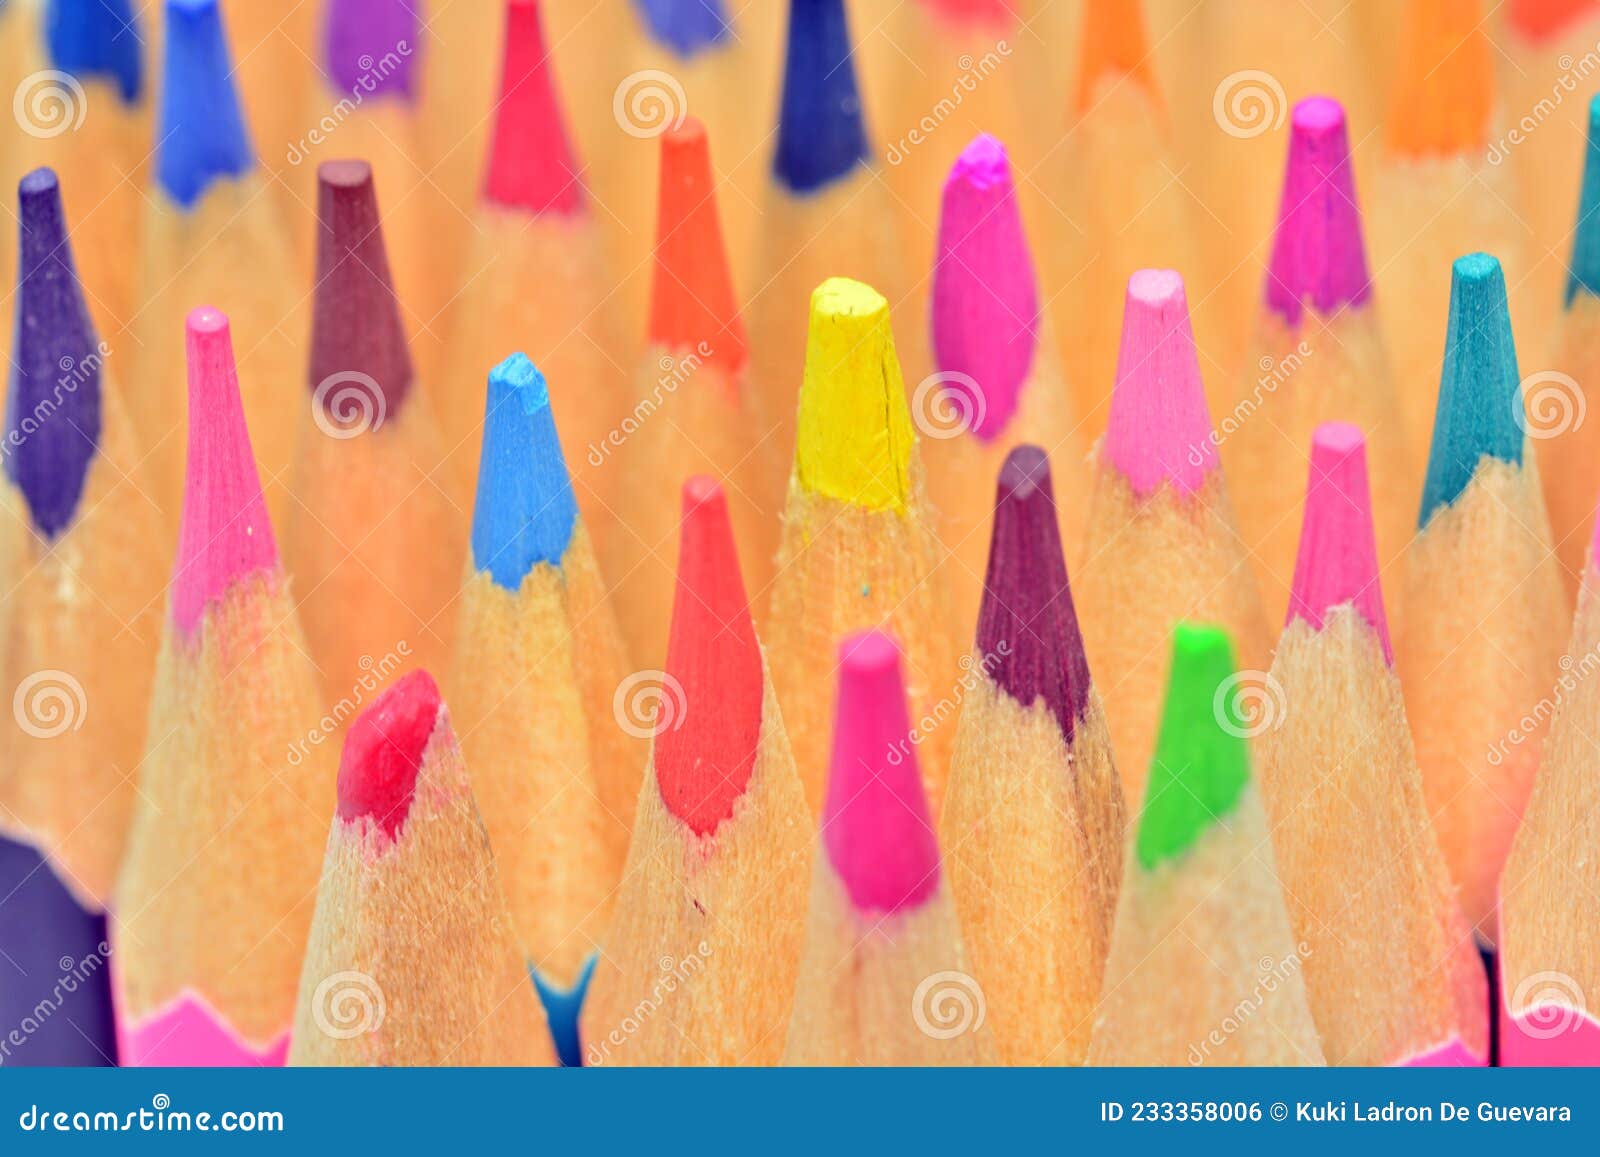 detail of colored pencil tips